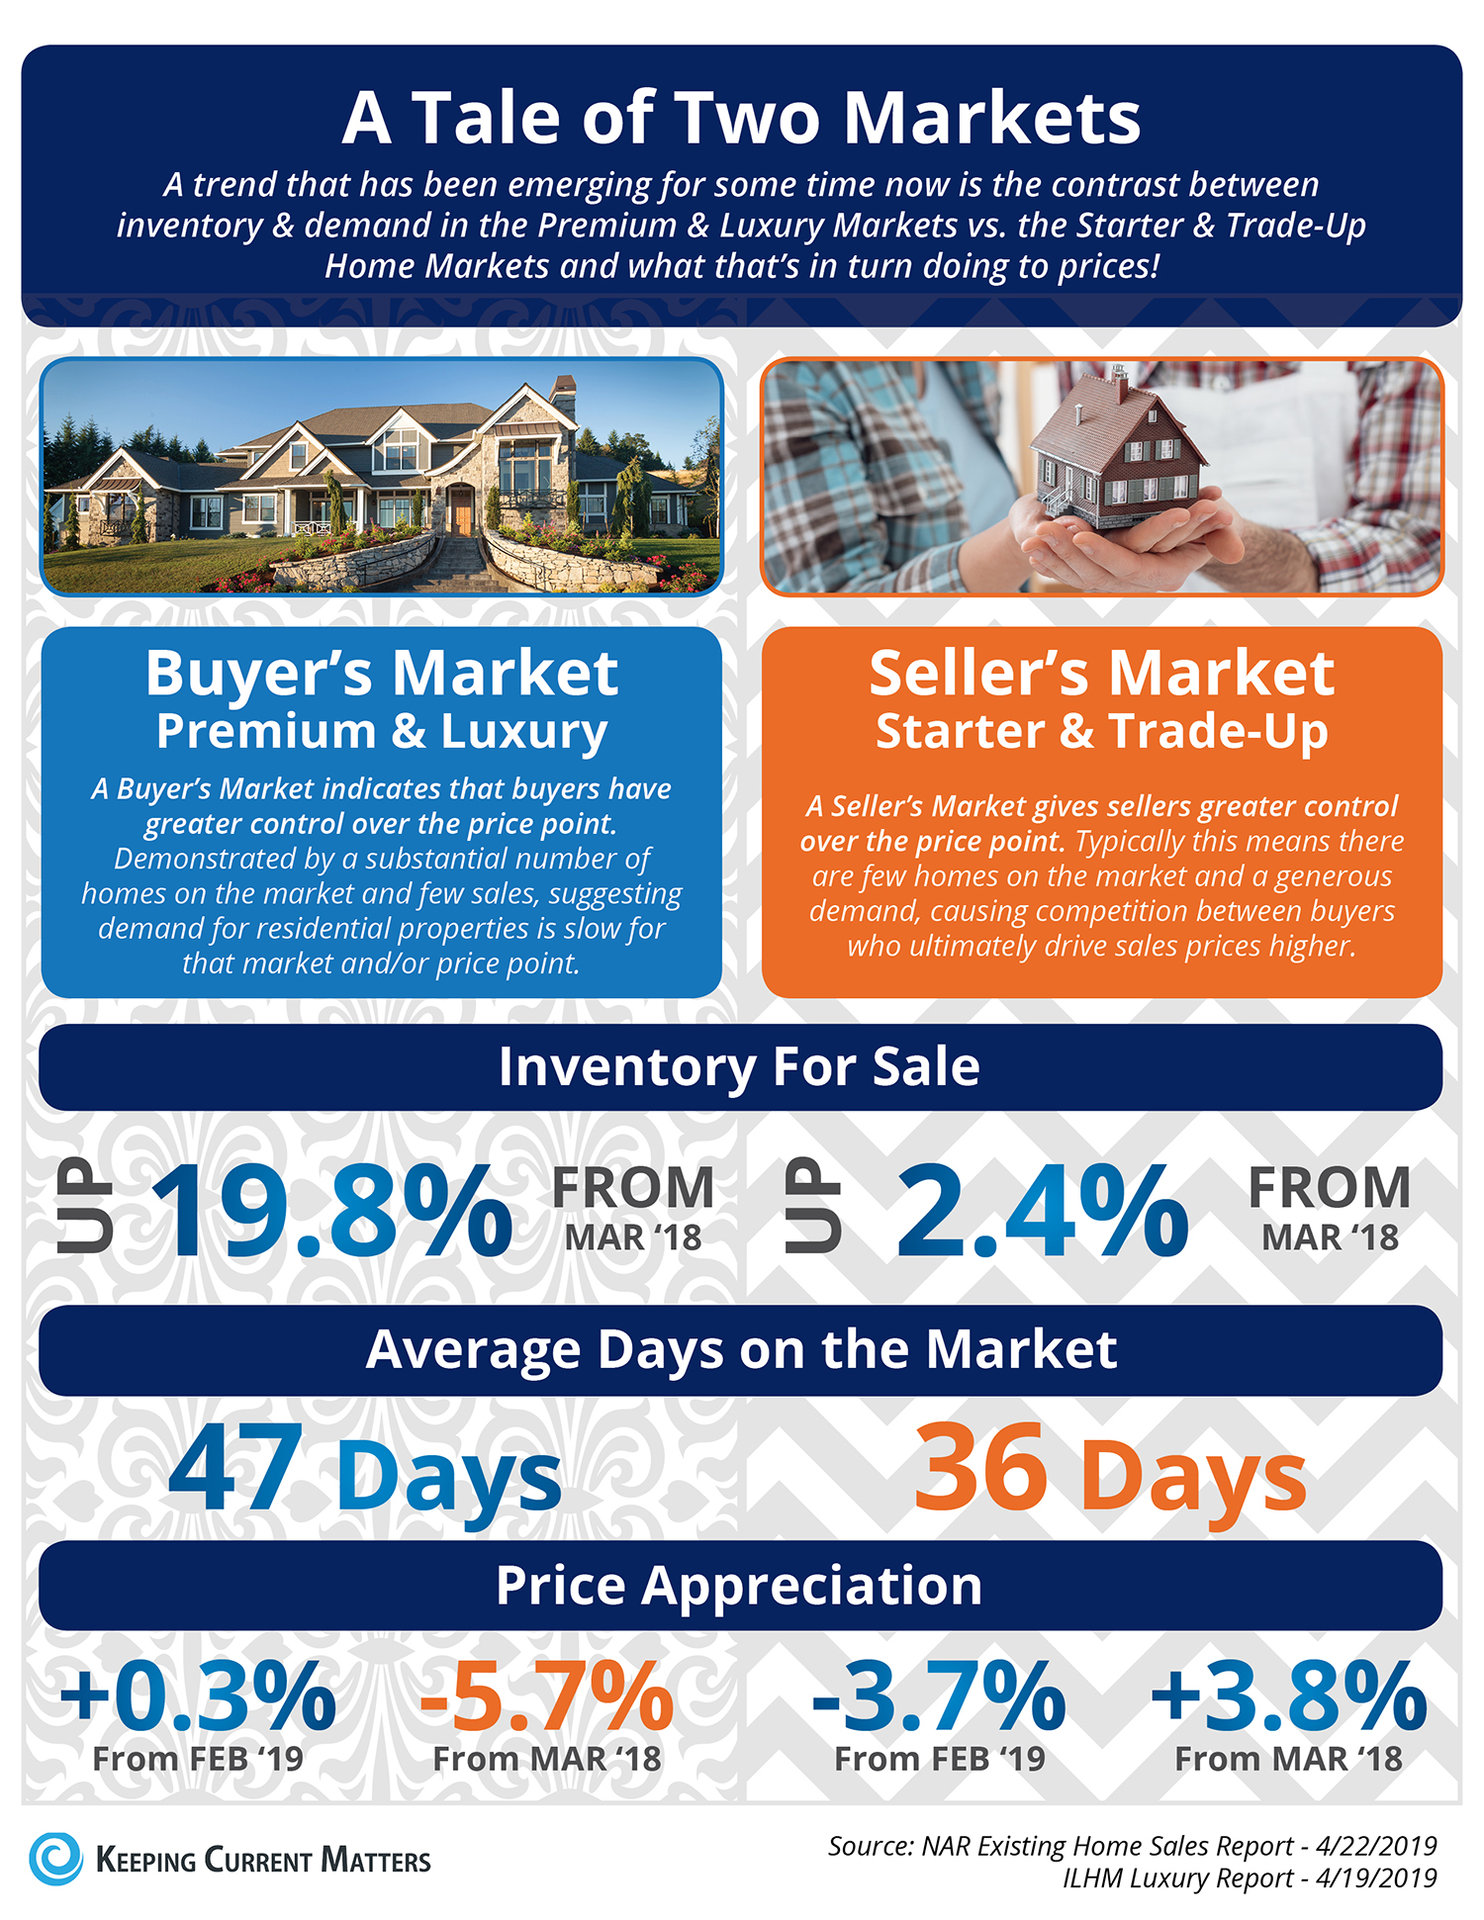 A Tale of Two Markets [INFOGRAPHIC] | Keeping Current Matters